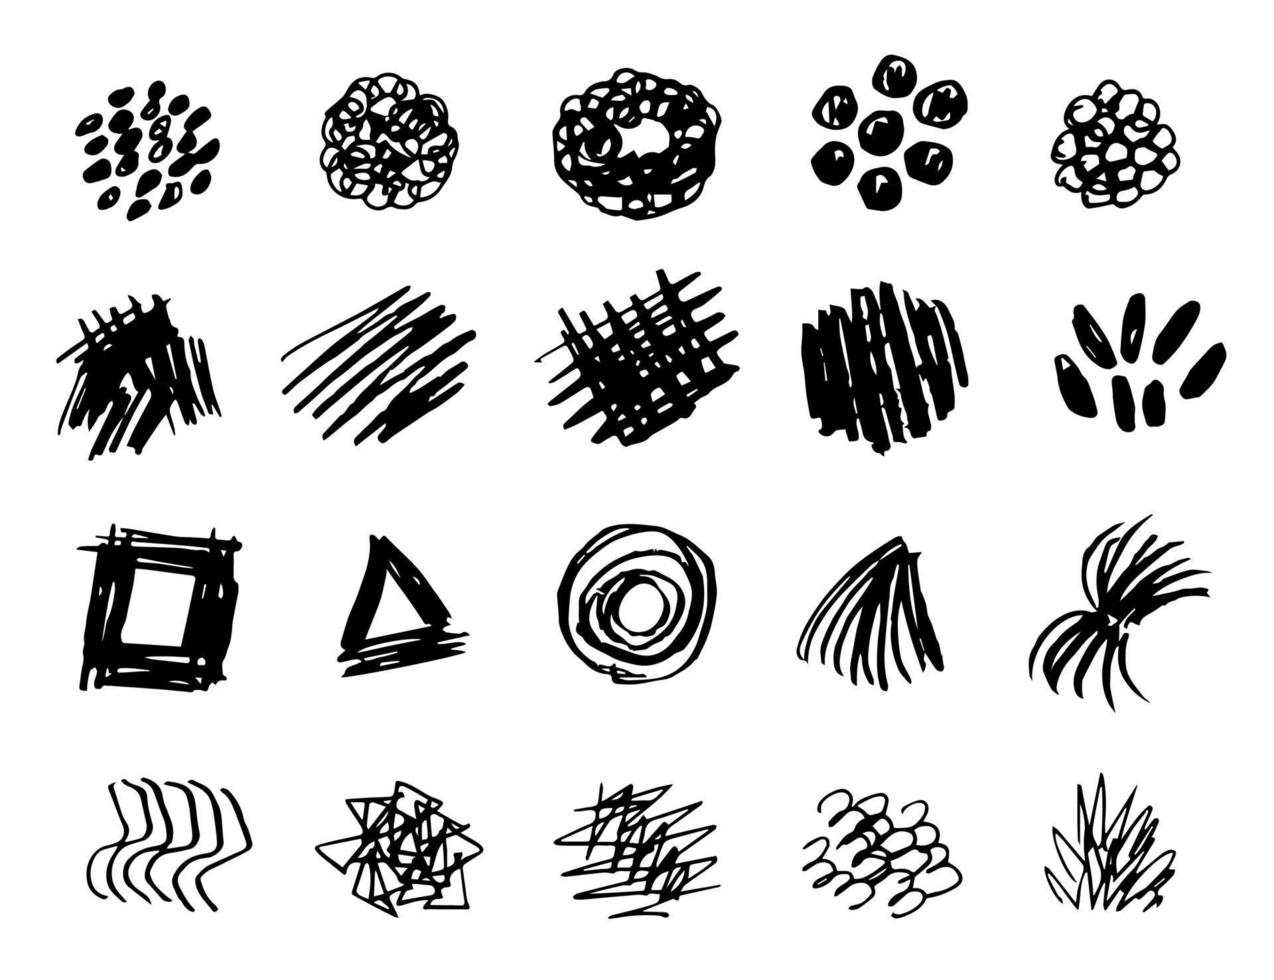 Hand-drawn vector black and white doodle set. Spots, dots, strokes, lines, scribbles. For prints, brushes, creating patterns, decoration, decor.